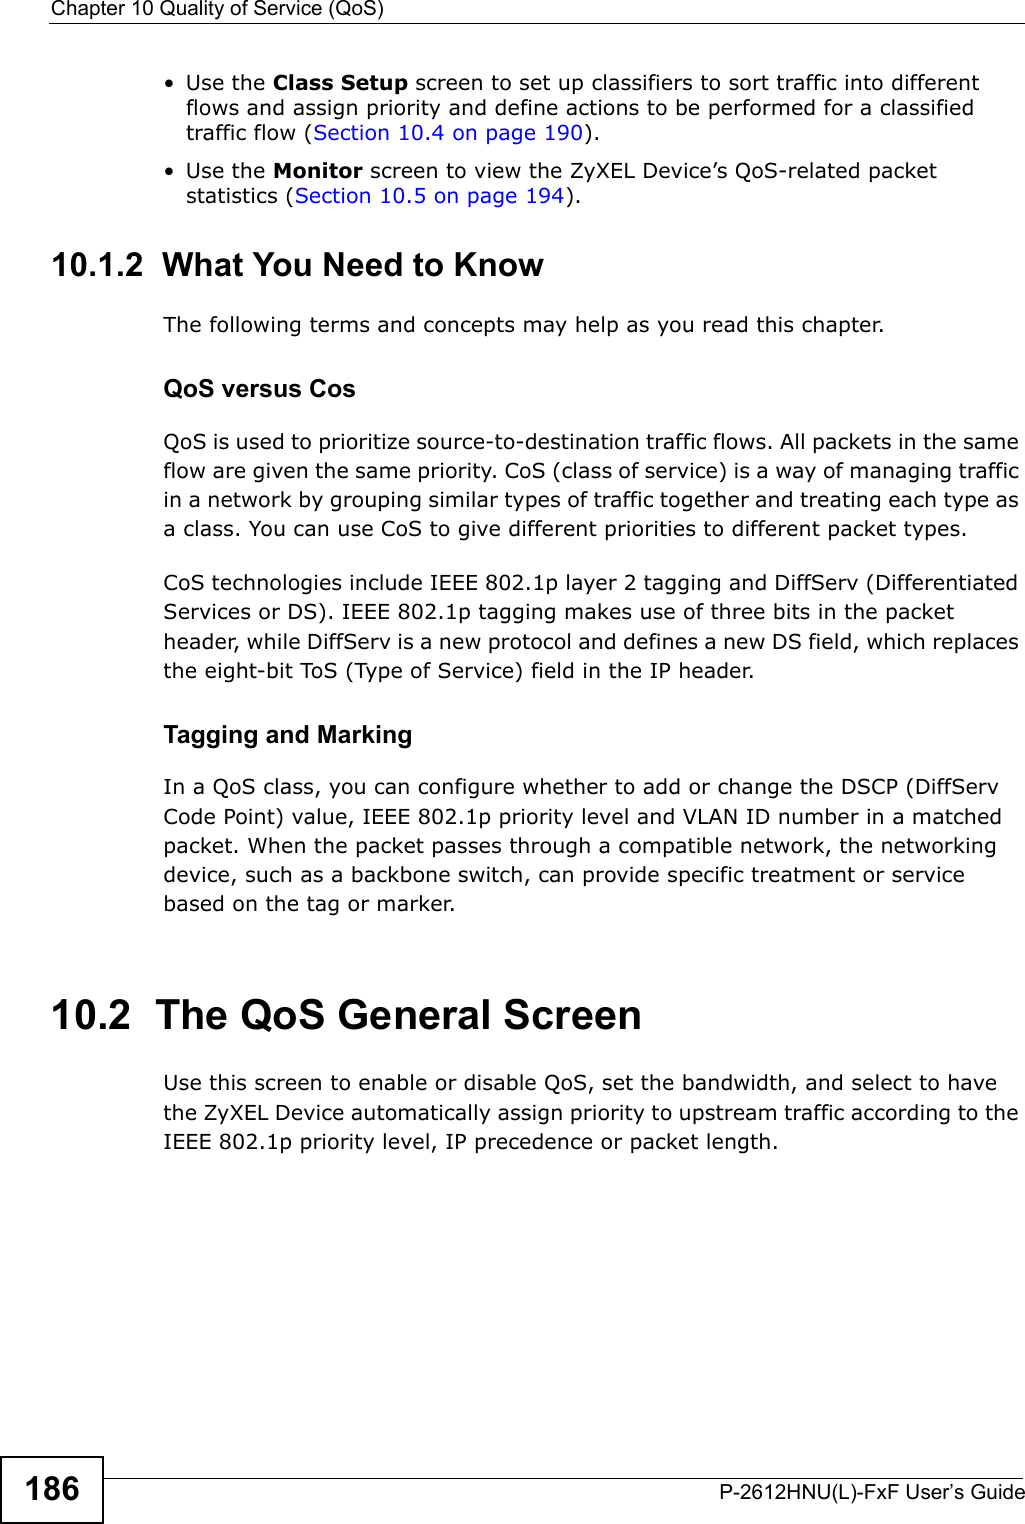 Chapter 10 Quality of Service (QoS)P-2612HNU(L)-FxF User’s Guide186• Use the Class Setup screen to set up classifiers to sort traffic into differentflows and assign priority and define actions to be performed for a classified traffic flow (Section 10.4 on page 190).• Use the Monitor screen to view the ZyXEL Device’s QoS-related packet statistics (Section 10.5 on page 194).10.1.2  What You Need to KnowThe following terms and concepts may help as you read this chapter.QoS versus CosQoS is used to prioritize source-to-destination traffic flows. All packets in the same flow are given the same priority. CoS (class of service) is a way of managing traffic in a network by grouping similar types of traffic together and treating each type as a class. You can use CoS to give different priorities to different packet types.CoS technologies include IEEE 802.1p layer 2 tagging and DiffServ (Differentiated Services or DS). IEEE 802.1p tagging makes use of three bits in the packet header, while DiffServ is a new protocol and defines a new DS field, which replaces the eight-bit ToS (Type of Service) field in the IP header. Tagging and MarkingIn a QoS class, you can configure whether to add or change the DSCP (DiffServ Code Point) value, IEEE 802.1p priority level and VLAN ID number in a matched packet. When the packet passes through a compatible network, the networking device, such as a backbone switch, can provide specific treatment or service based on the tag or marker.10.2  The QoS General Screen Use this screen to enable or disable QoS, set the bandwidth, and select to havethe ZyXEL Device automatically assign priority to upstream traffic according to the IEEE 802.1p priority level, IP precedence or packet length.